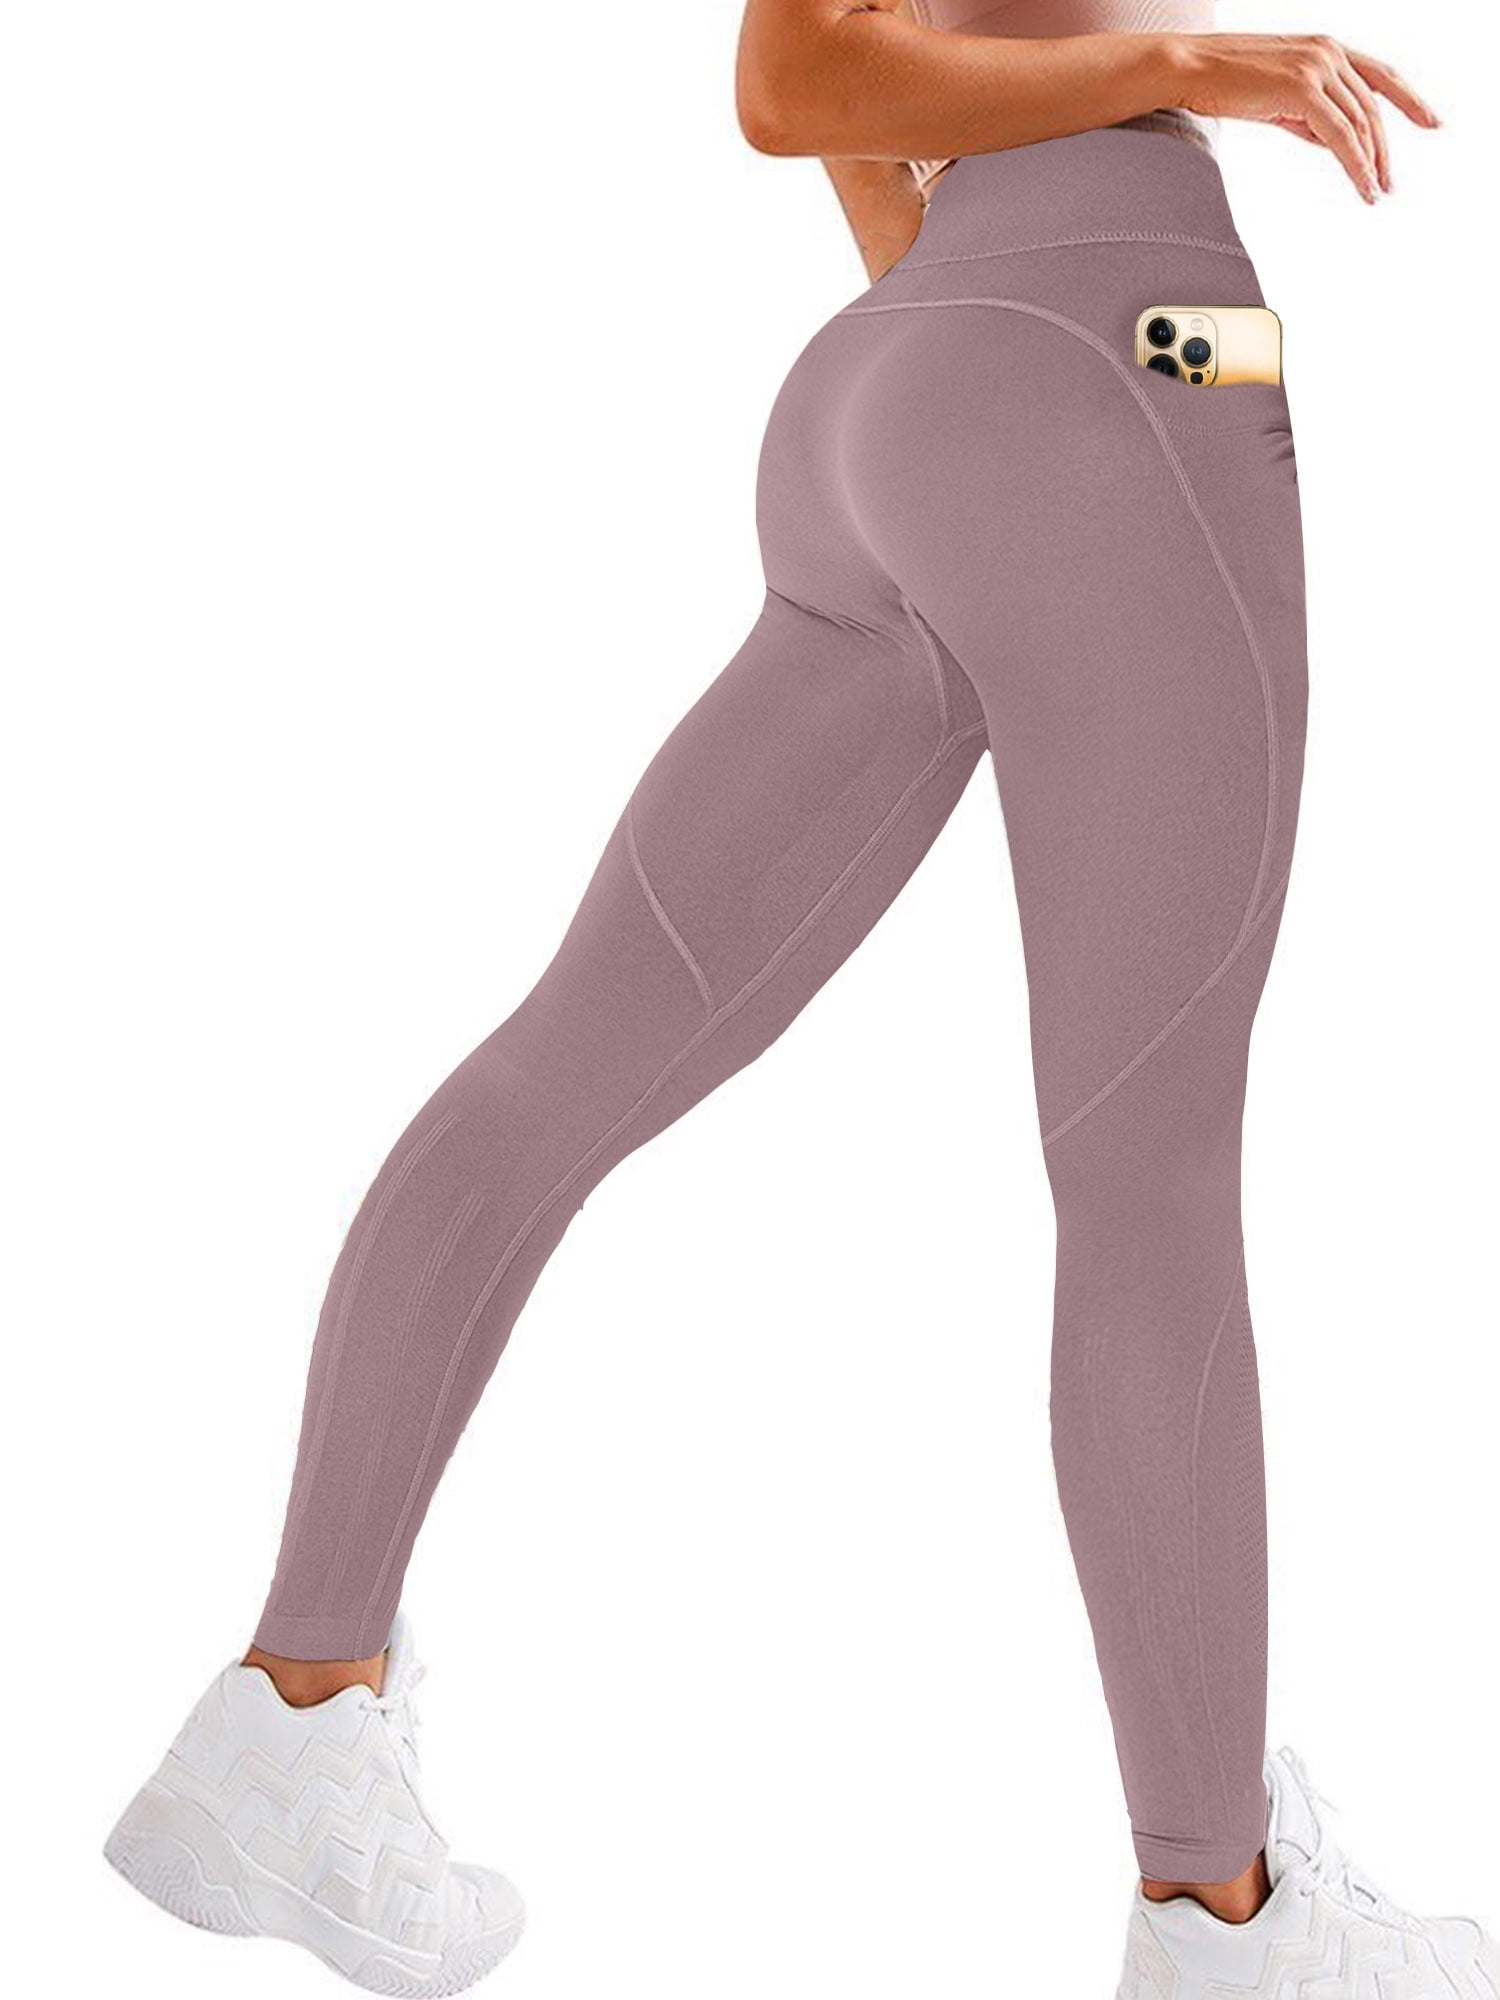 QRIC Womens Seamless Leggings With Pocket High Waisted Workout Tight Leggings  Gym Yoga Pants Tummy Control Sports Compression 